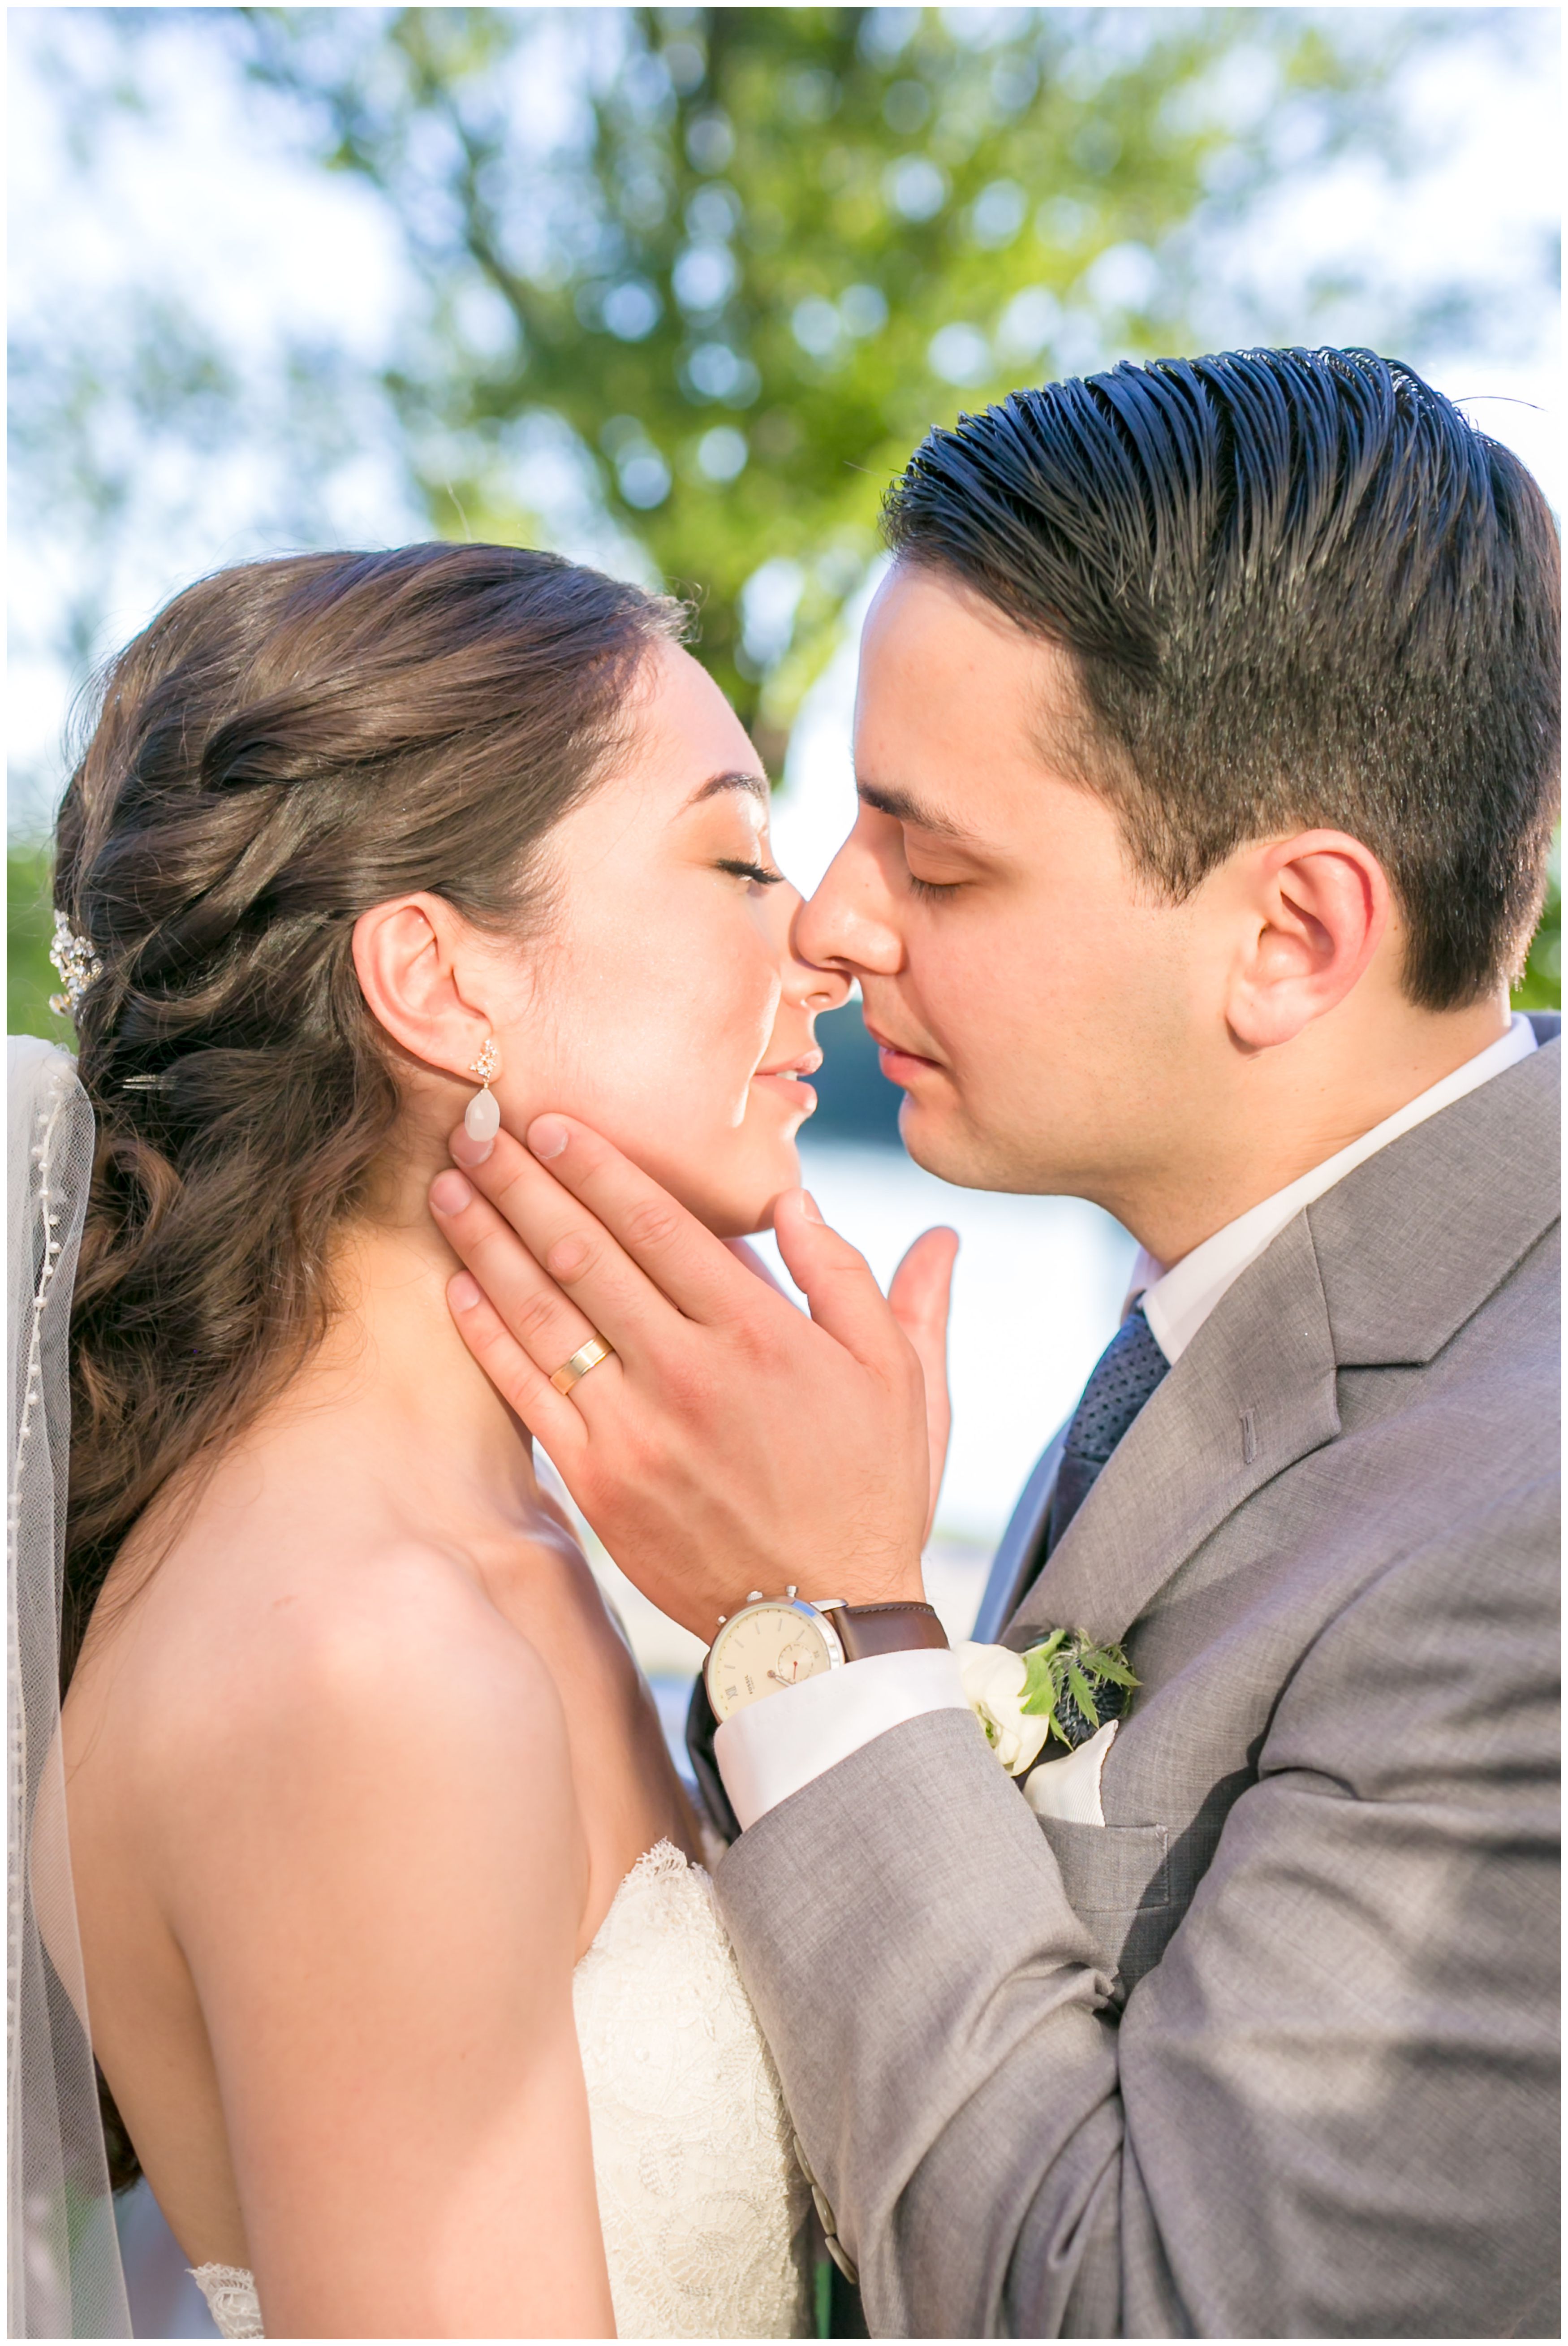 Bride and groom portrait almost kiss at outdoor lakeside wedding